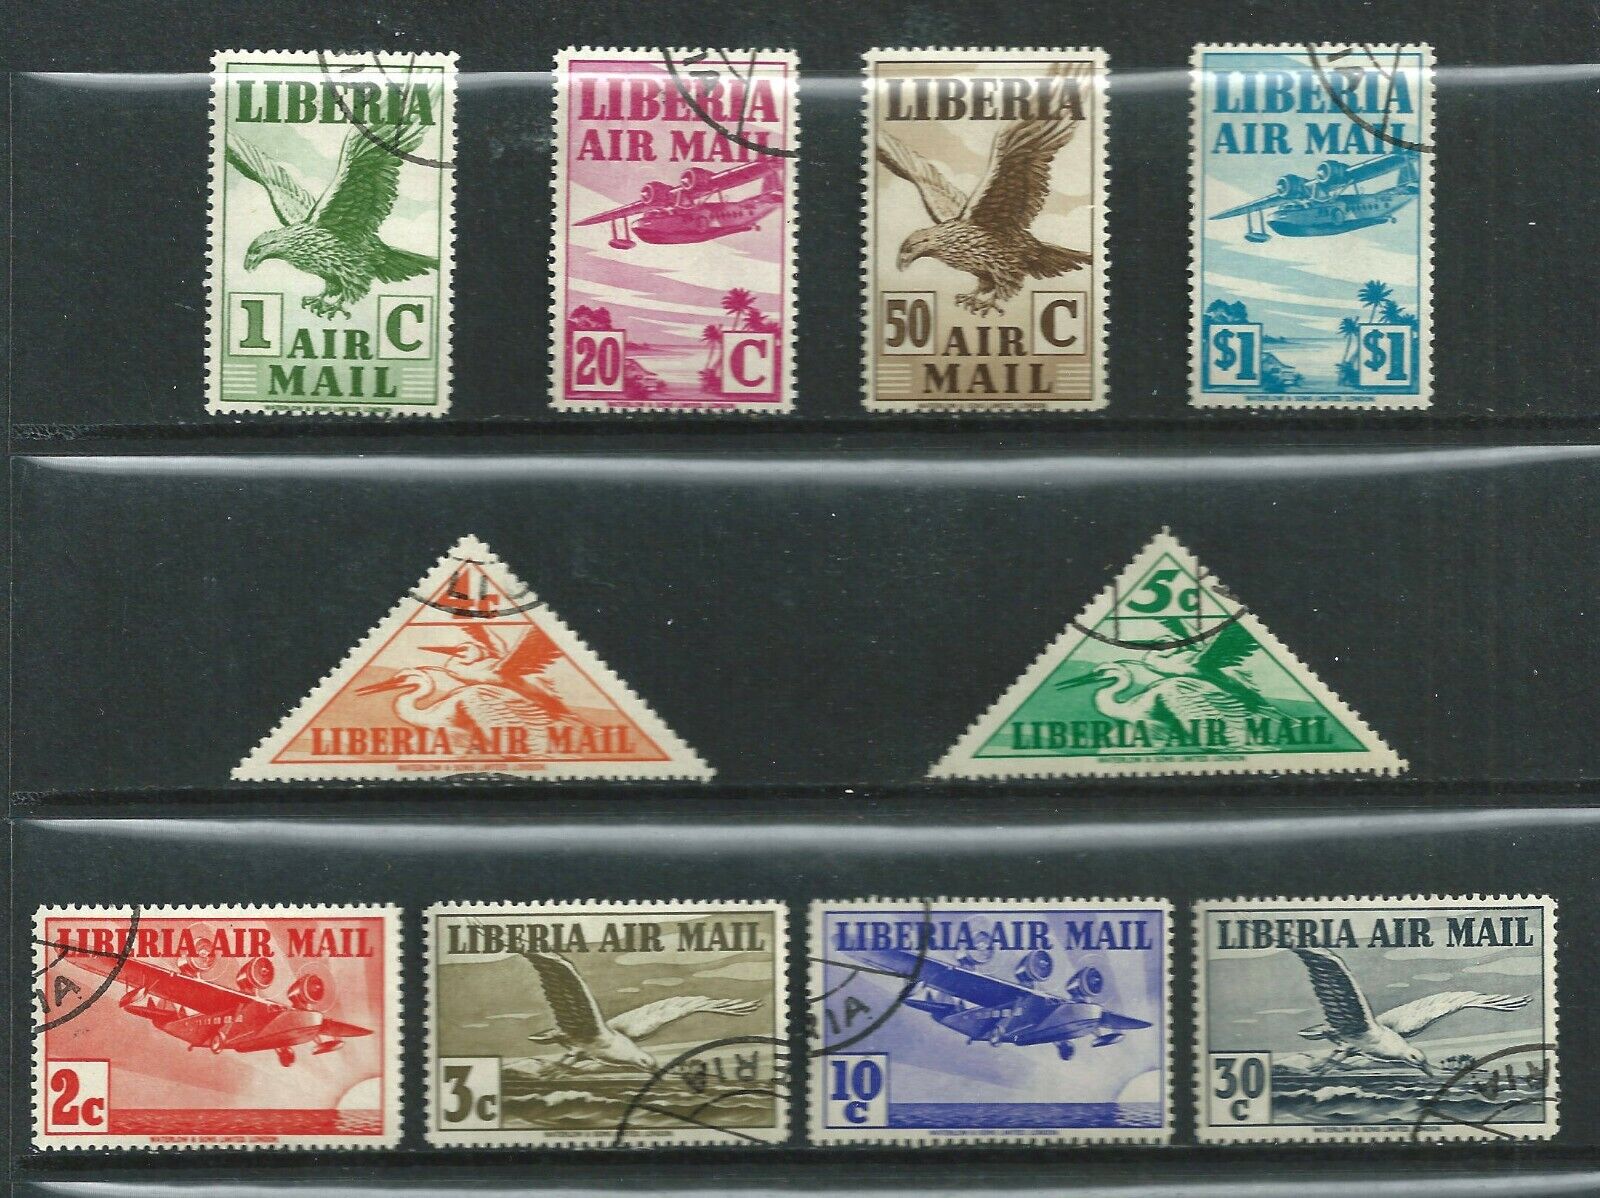 Liberia Max 44% OFF Ranking TOP10 - 10 CTO Mail Air 1938 stamps